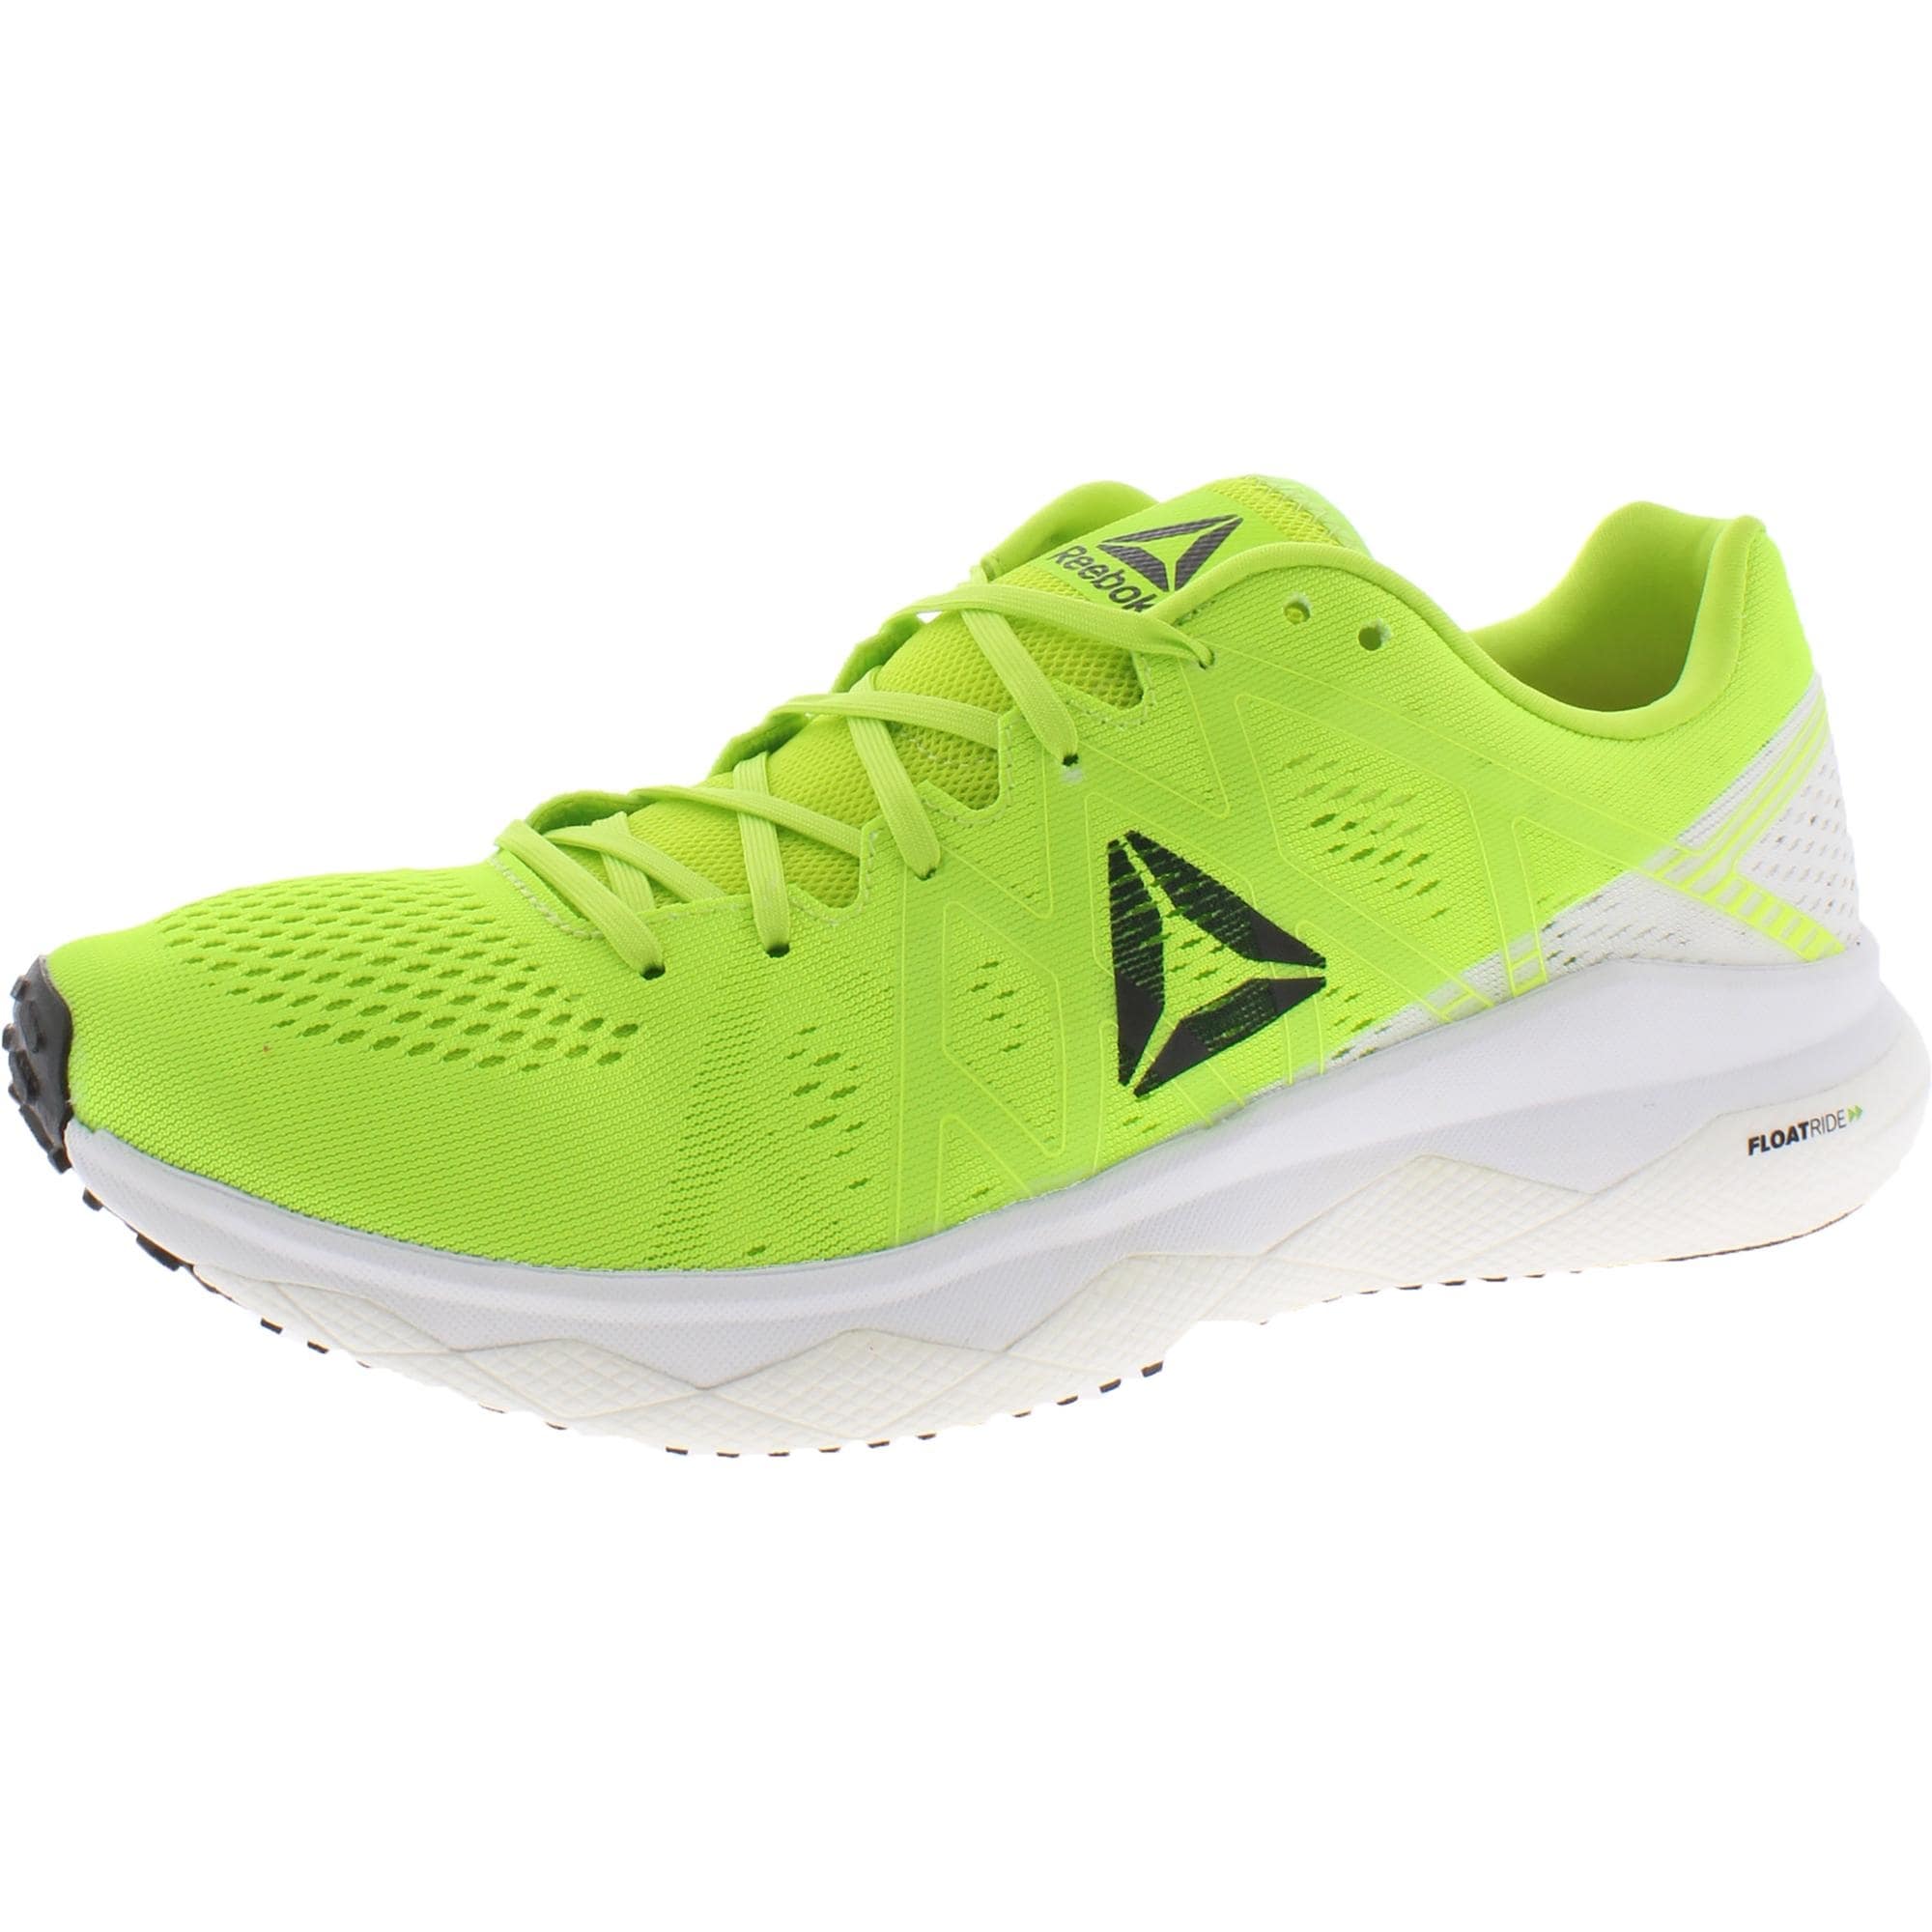 neon workout shoes